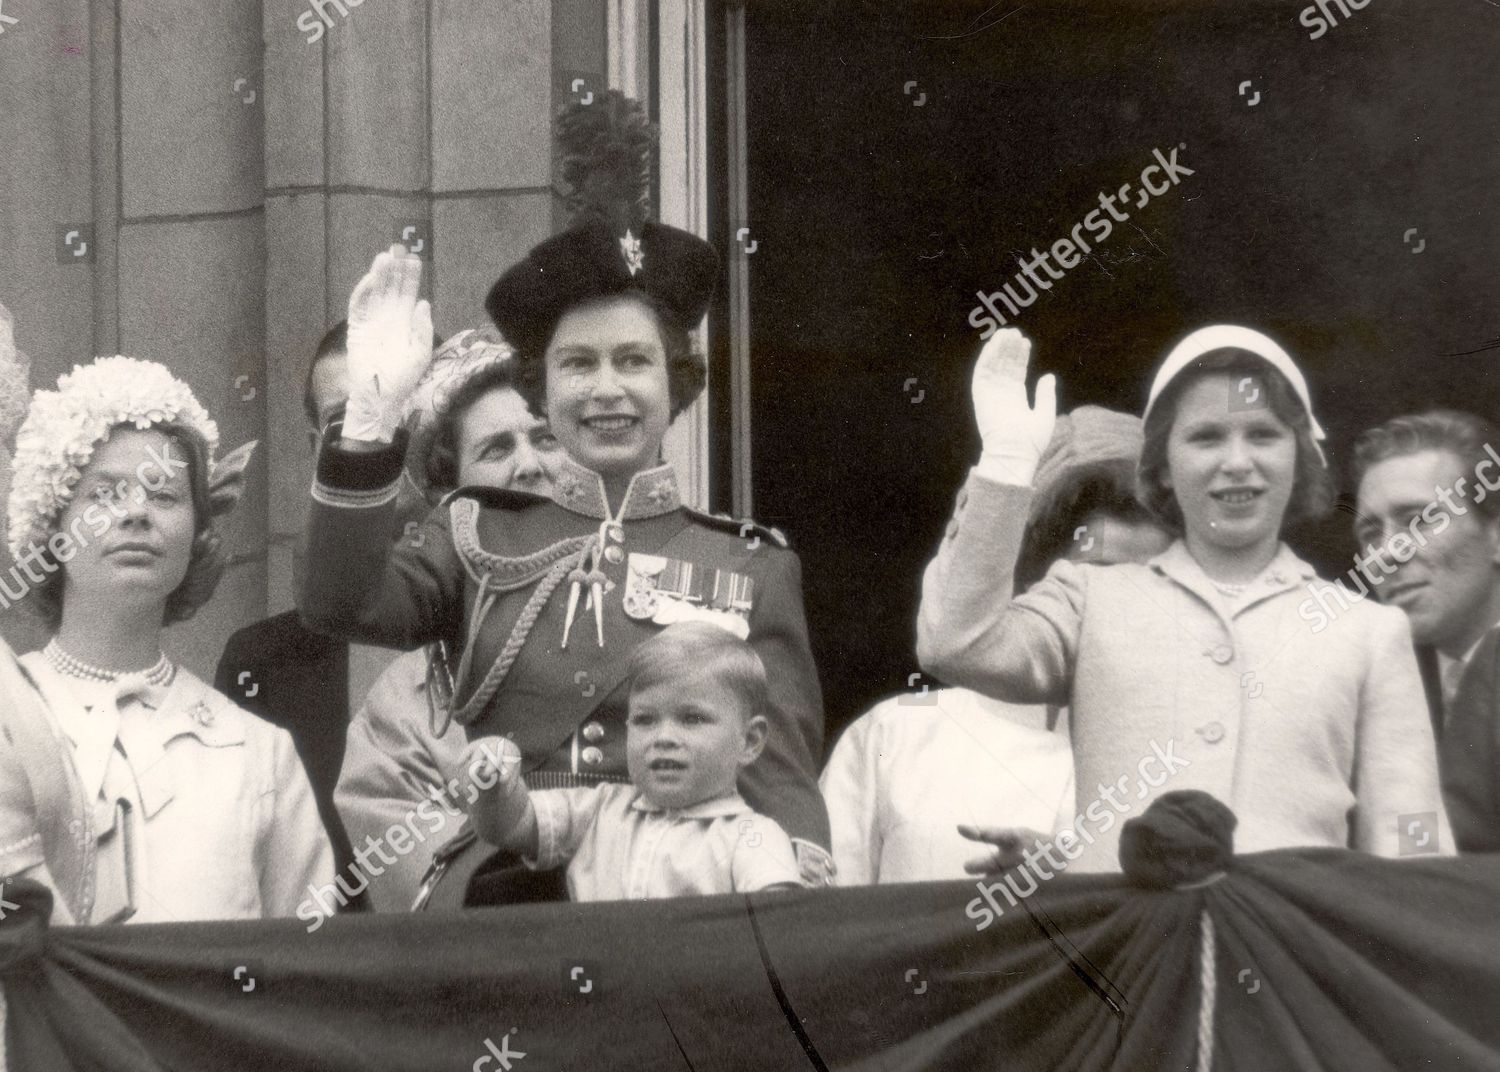 queen-elizabeth-ii-with-prince-andrew-now-the-duke-of-york-waving-from-the-balcony-with-princess-anne-now-the-princess-royal-right-the-duchess-of-kent-left-and-anthony-armstrong-jones-now-lord-snowdon-after-the-trooping-the-colour-ceremony-in-196-shutterstock-editorial-896143a.jpg